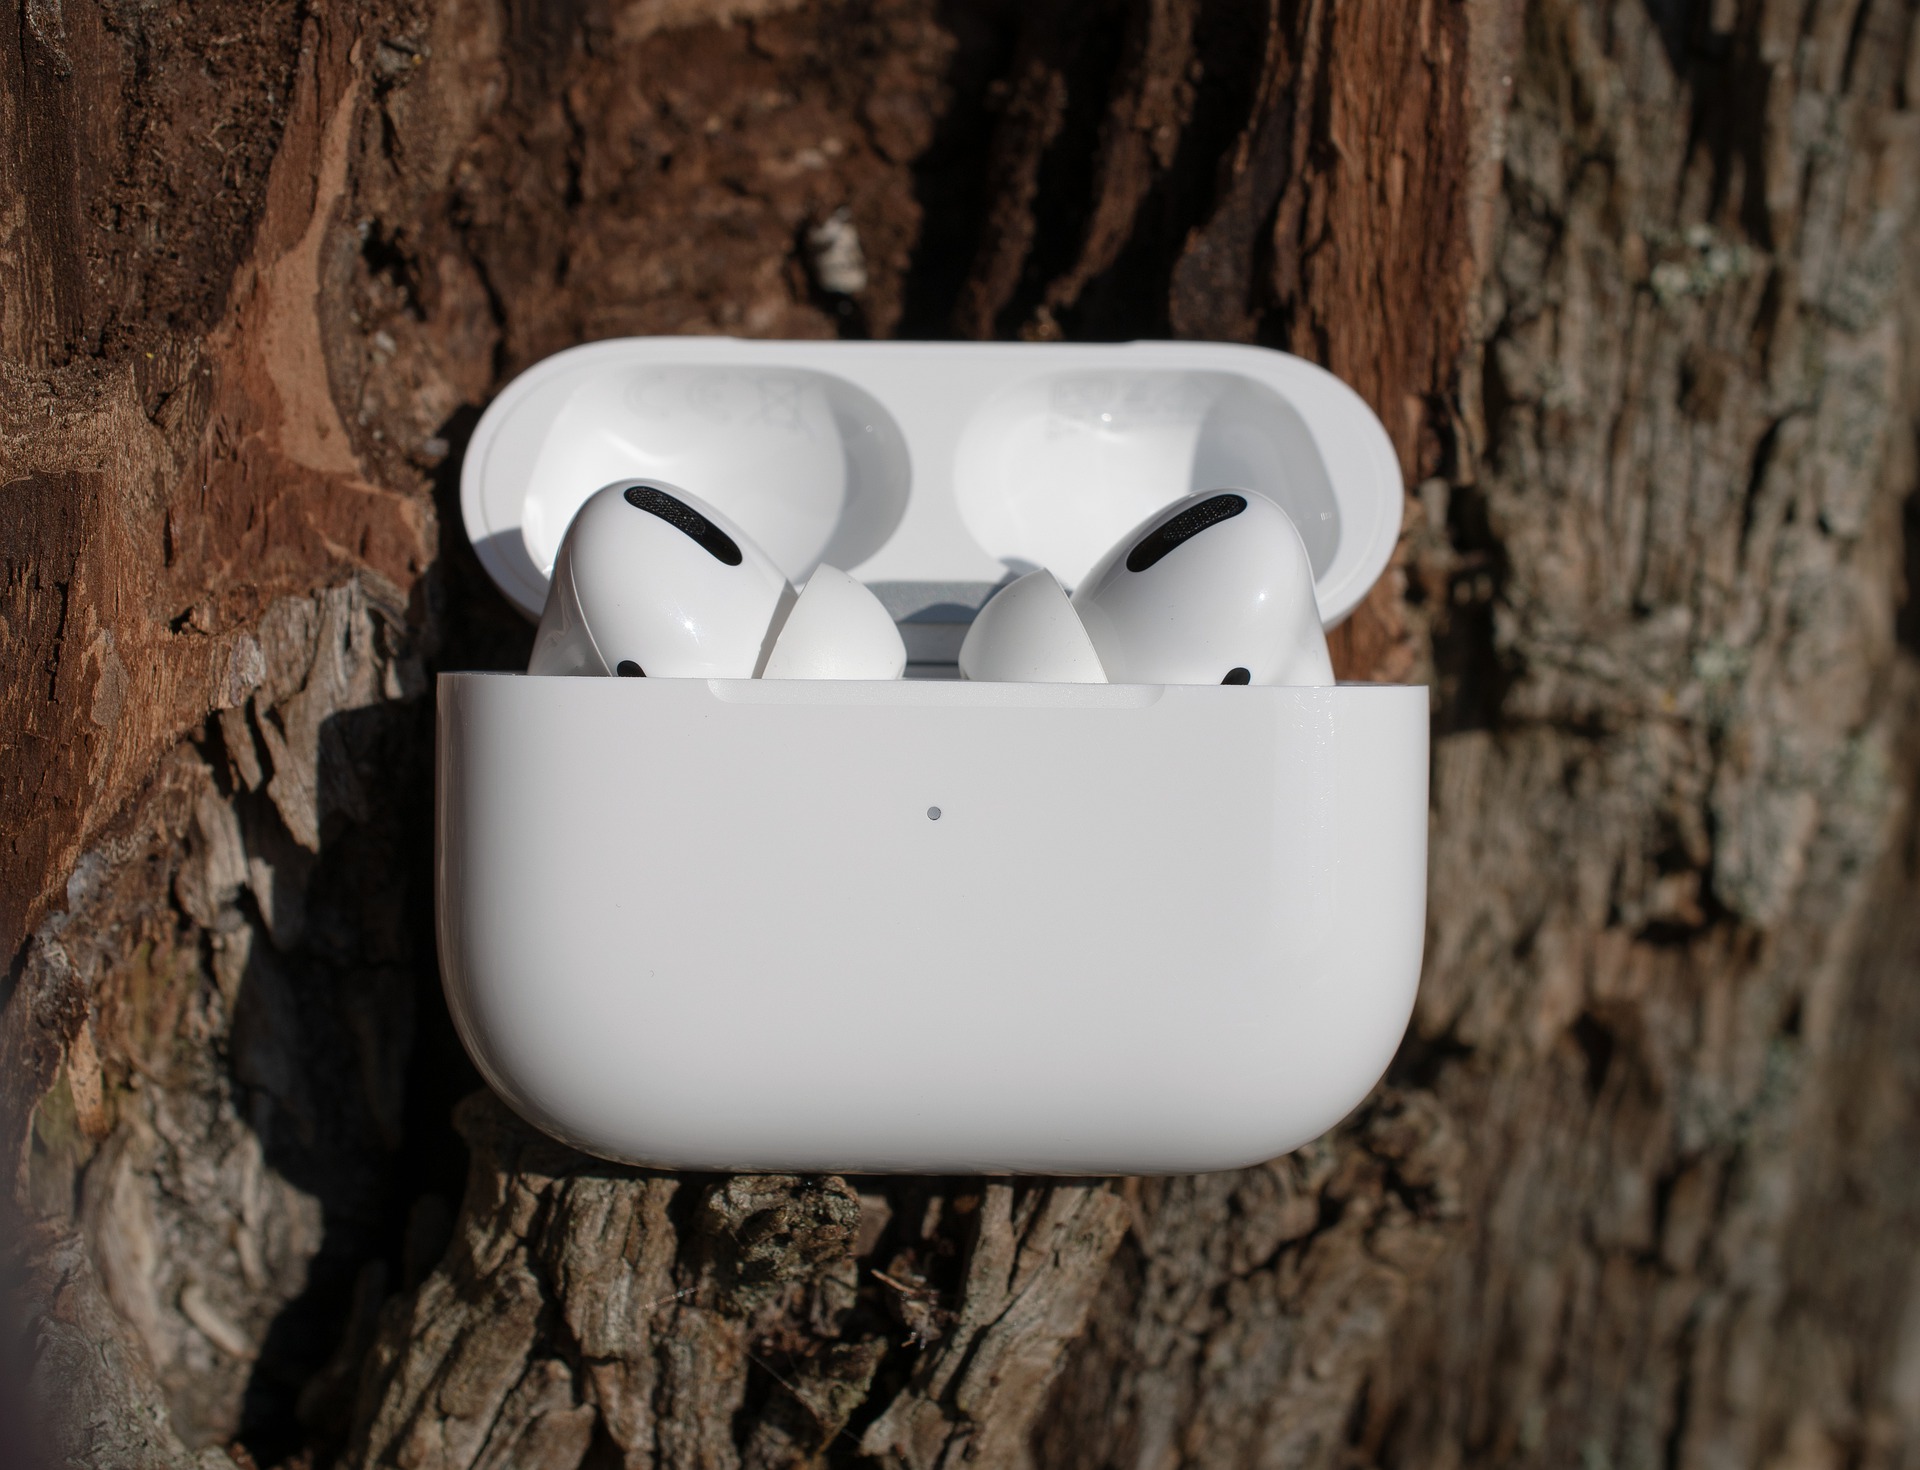 How to find lost AirPods? – The Definitive Guide